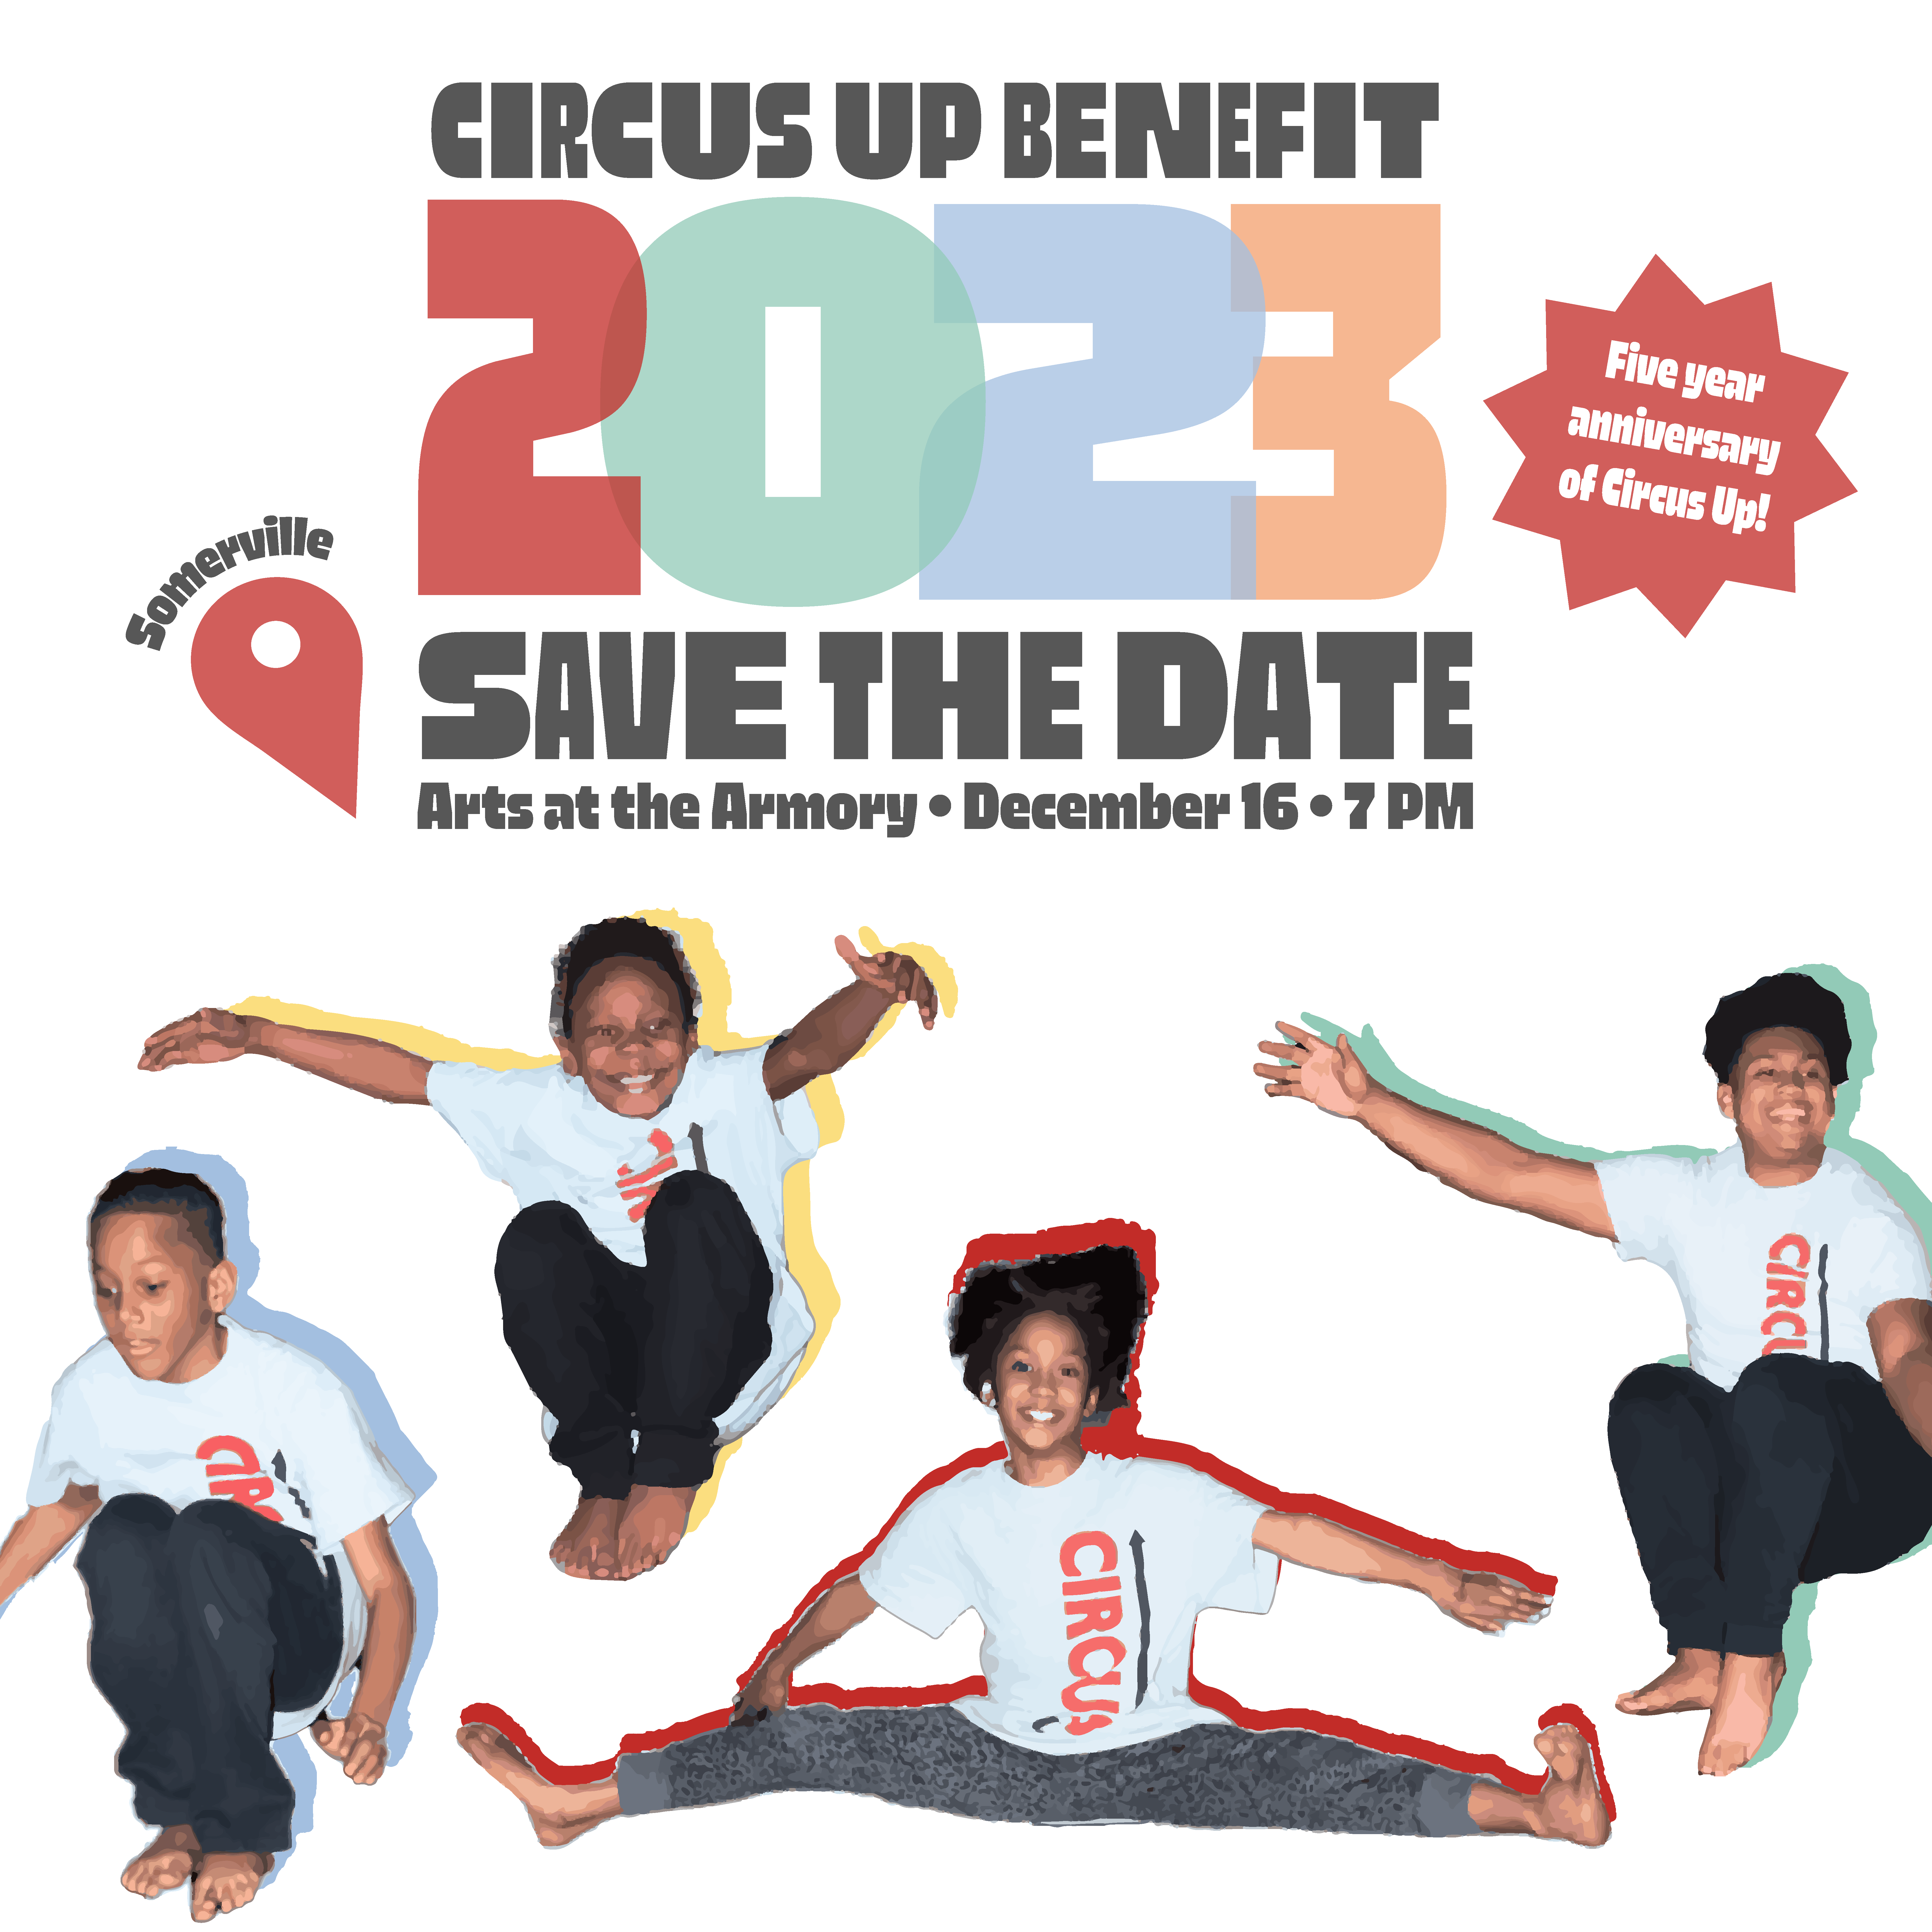 Event poster with photos of young circus artists